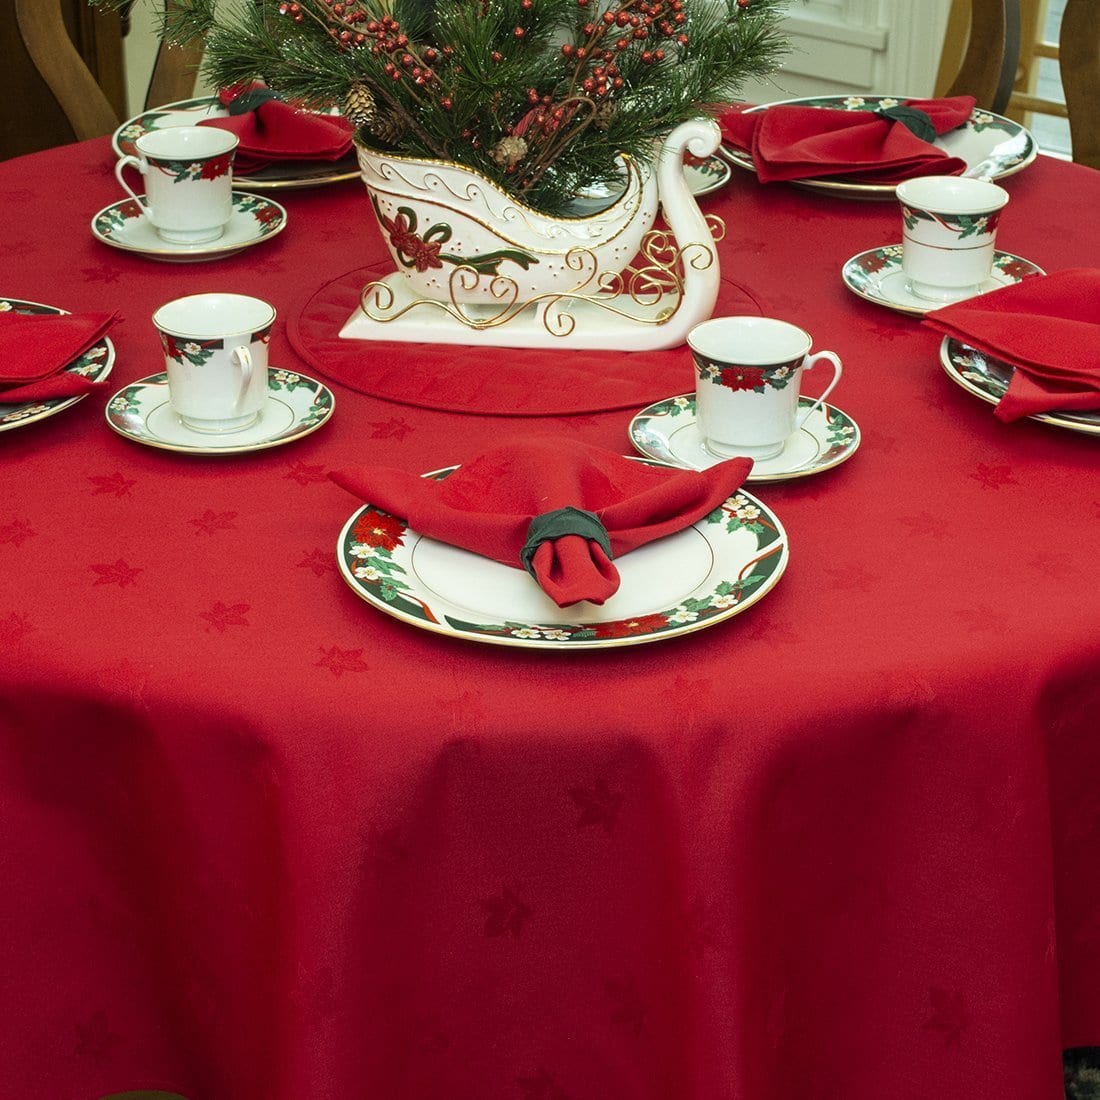 LOVWY Polyester 2.5 / 2 FT Burgundy Cocktail Tablecloth + Red Sash